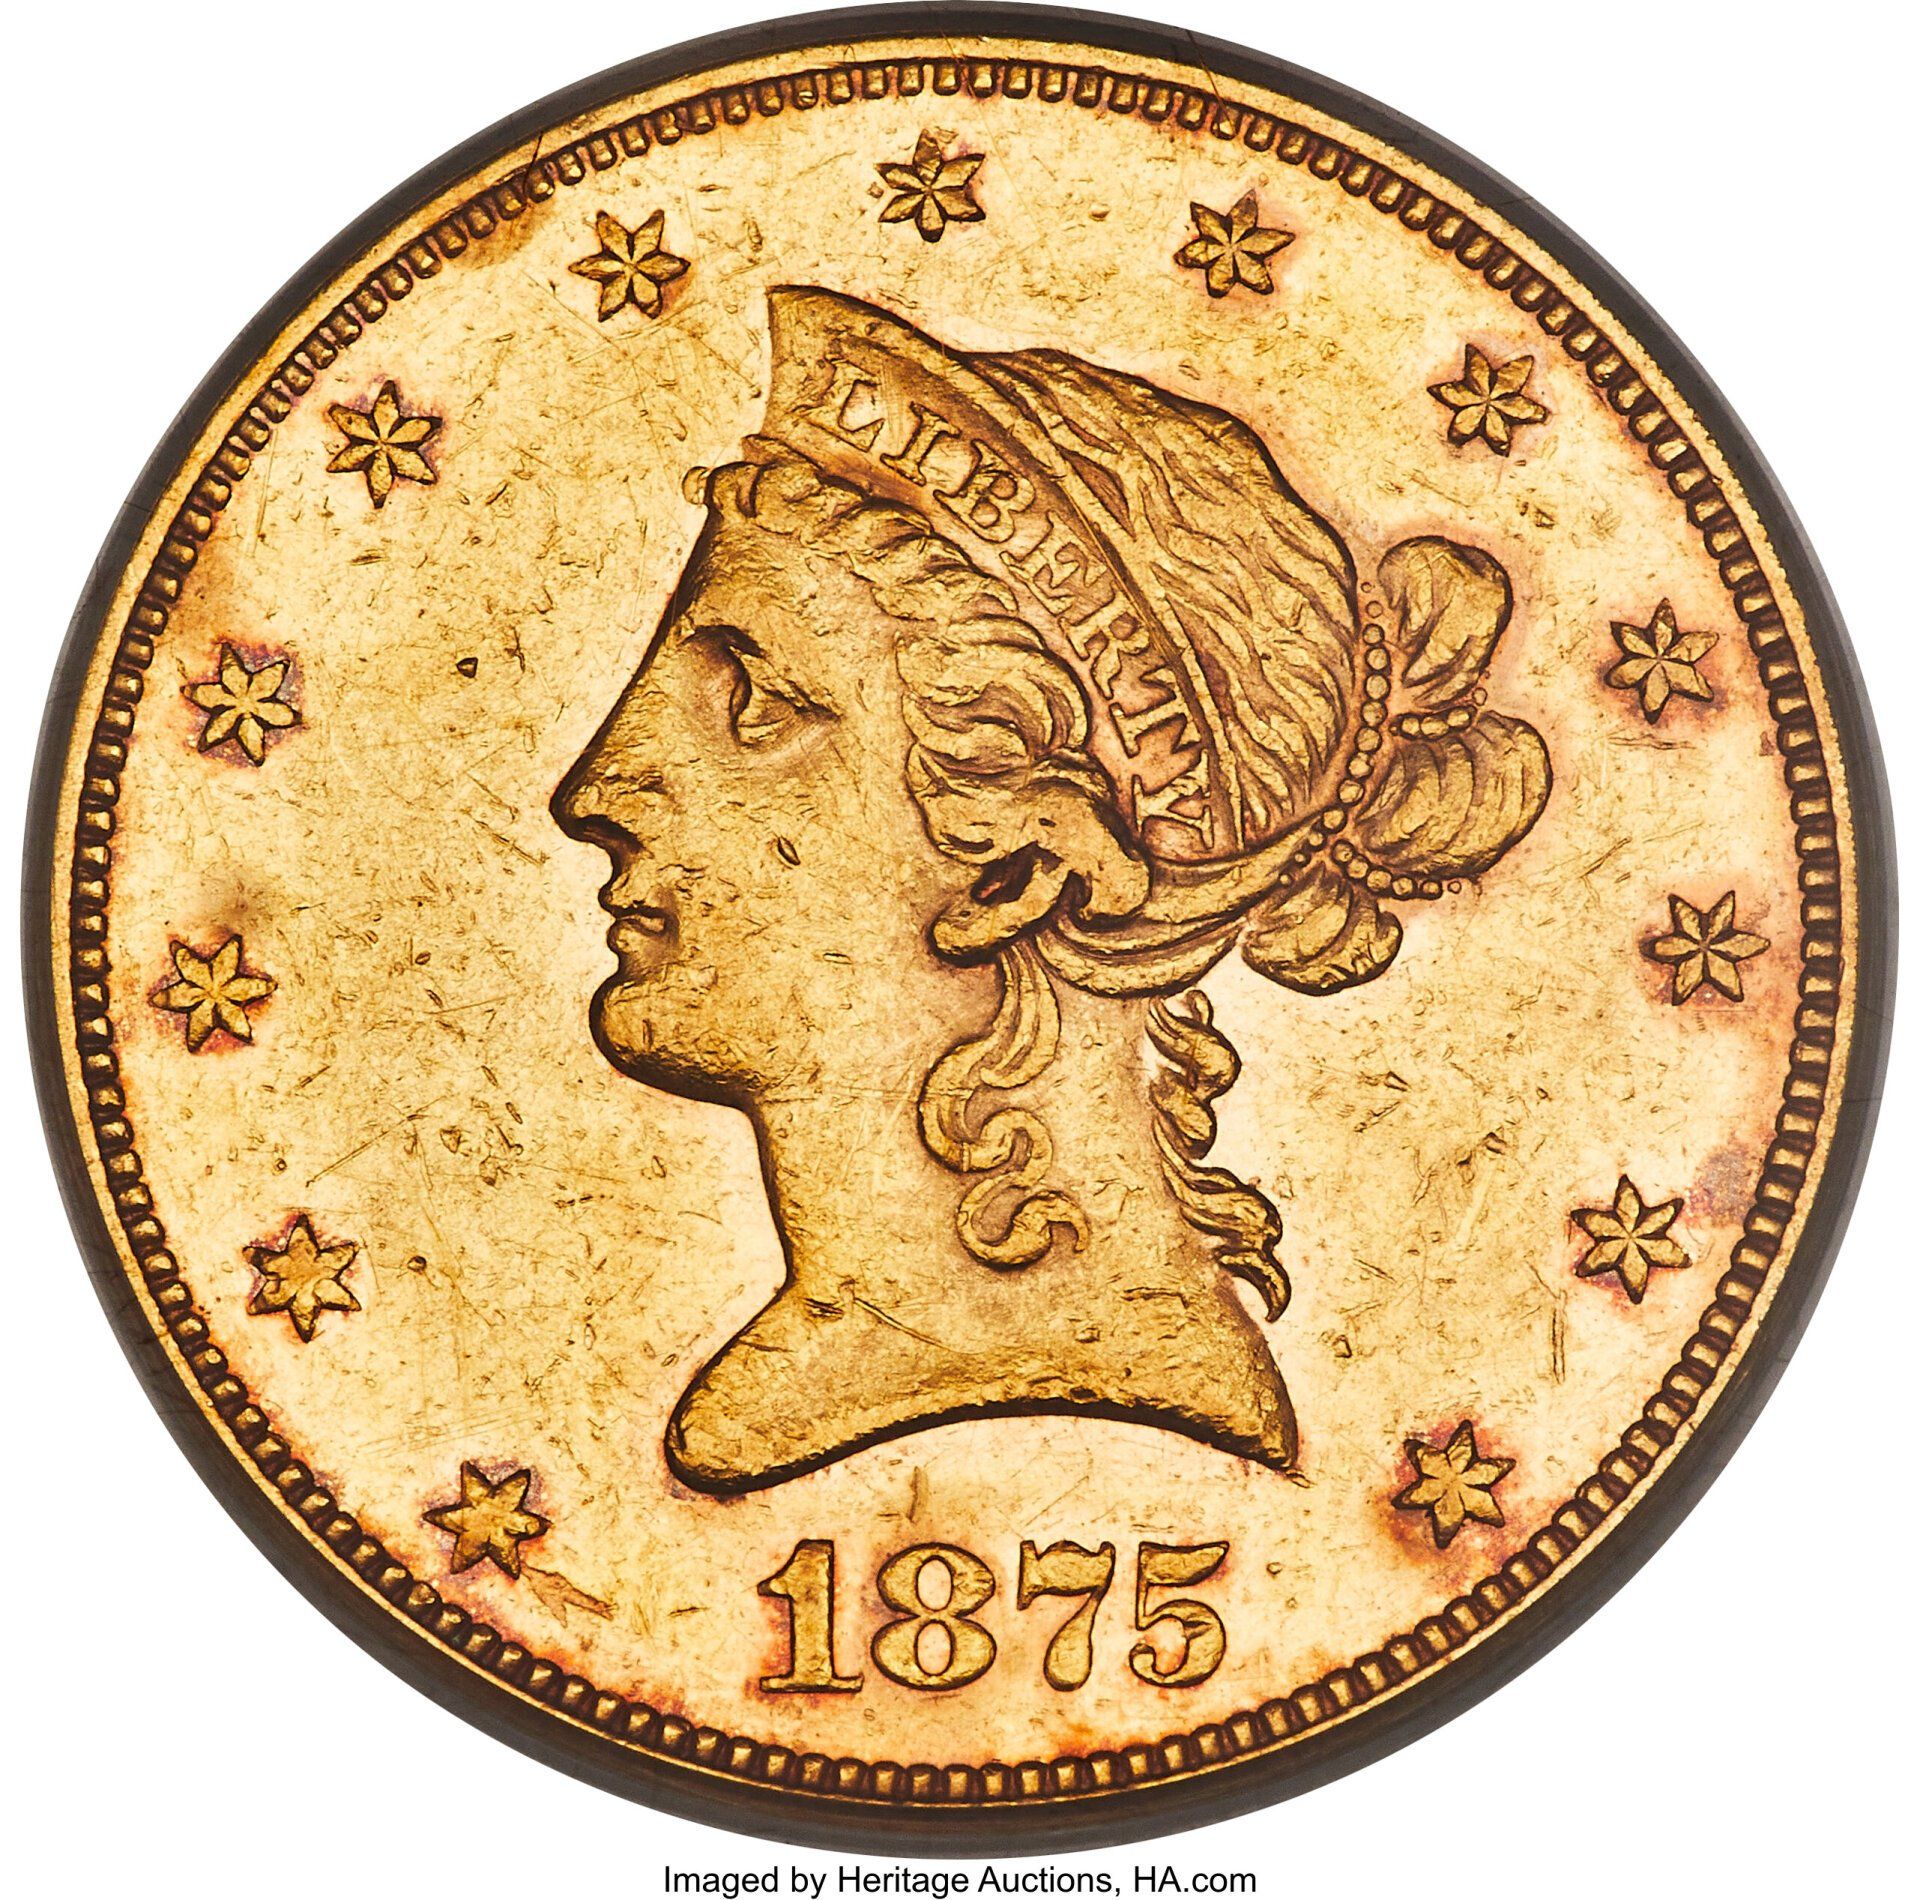 1875 ten dollar gold piece offered by Heritage Auctions, HA.com